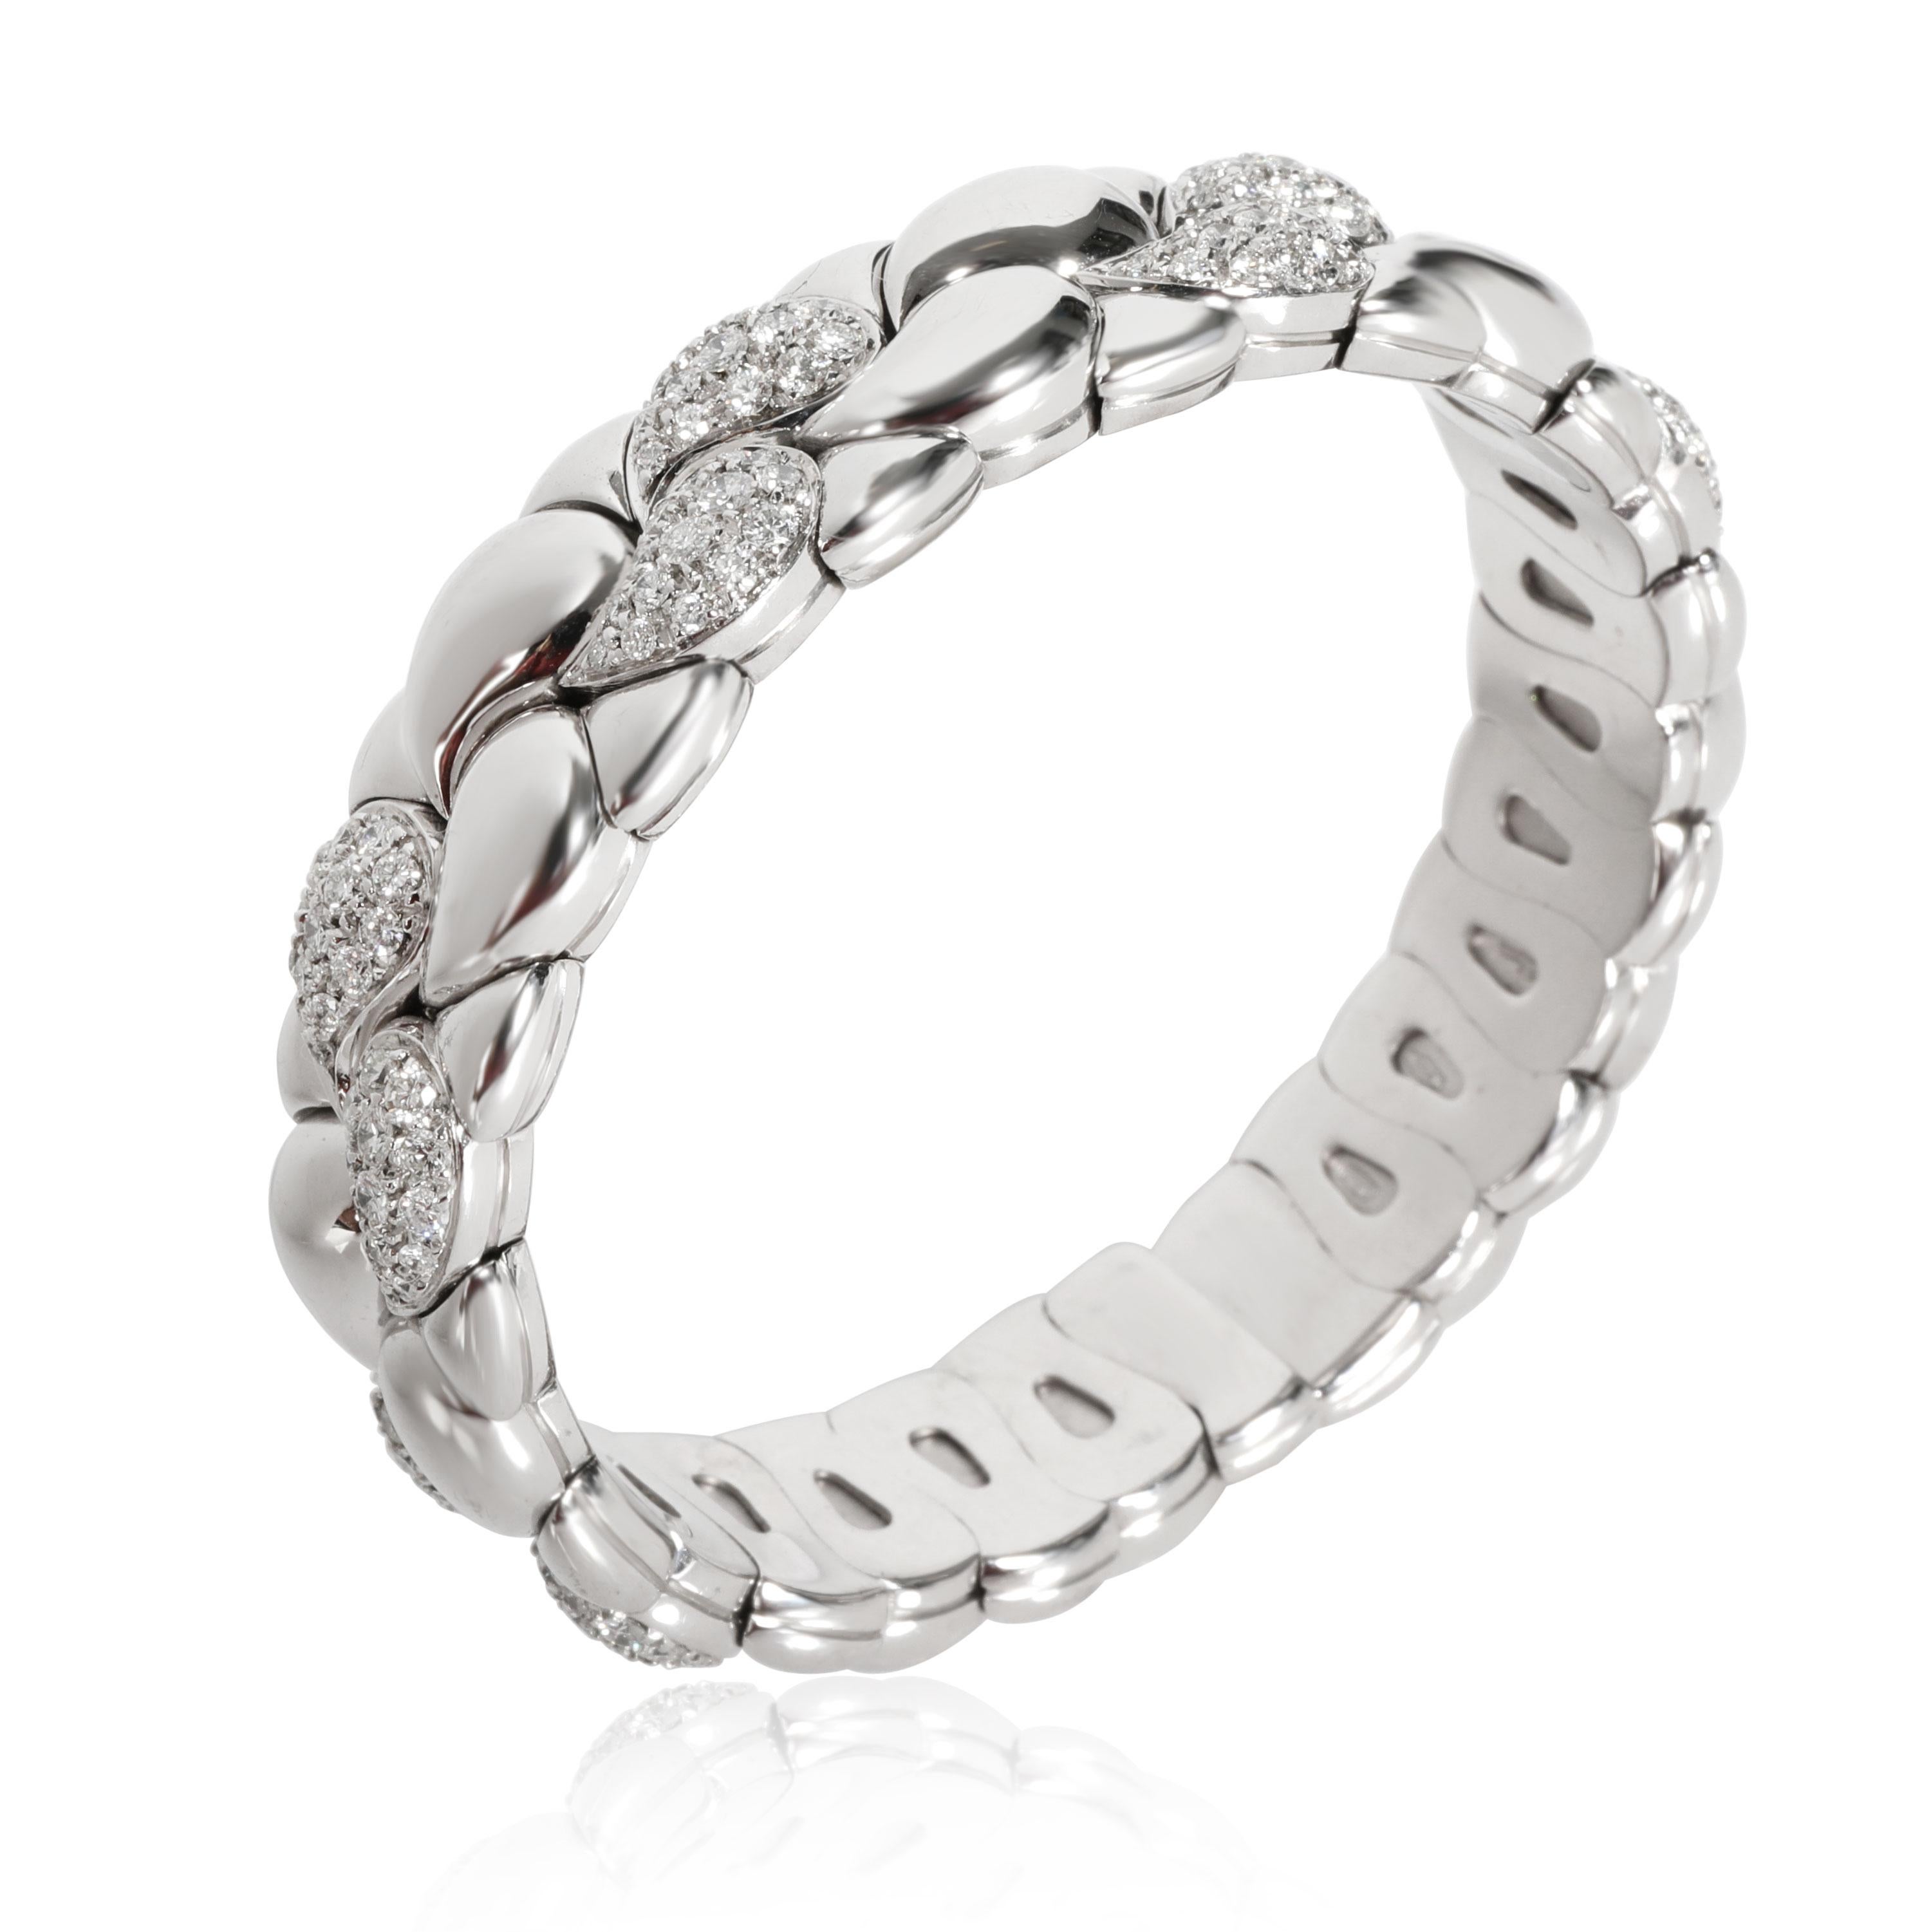 Chopard Casmir Diamond Bangle in 18K White Gold 2.1 CTW

PRIMARY DETAILS
SKU: 111325
Listing Title: Chopard Casmir Diamond Bangle in 18K White Gold 2.1 CTW
Condition Description: Retails for 18,000 USD. In excellent condition and recently polished.